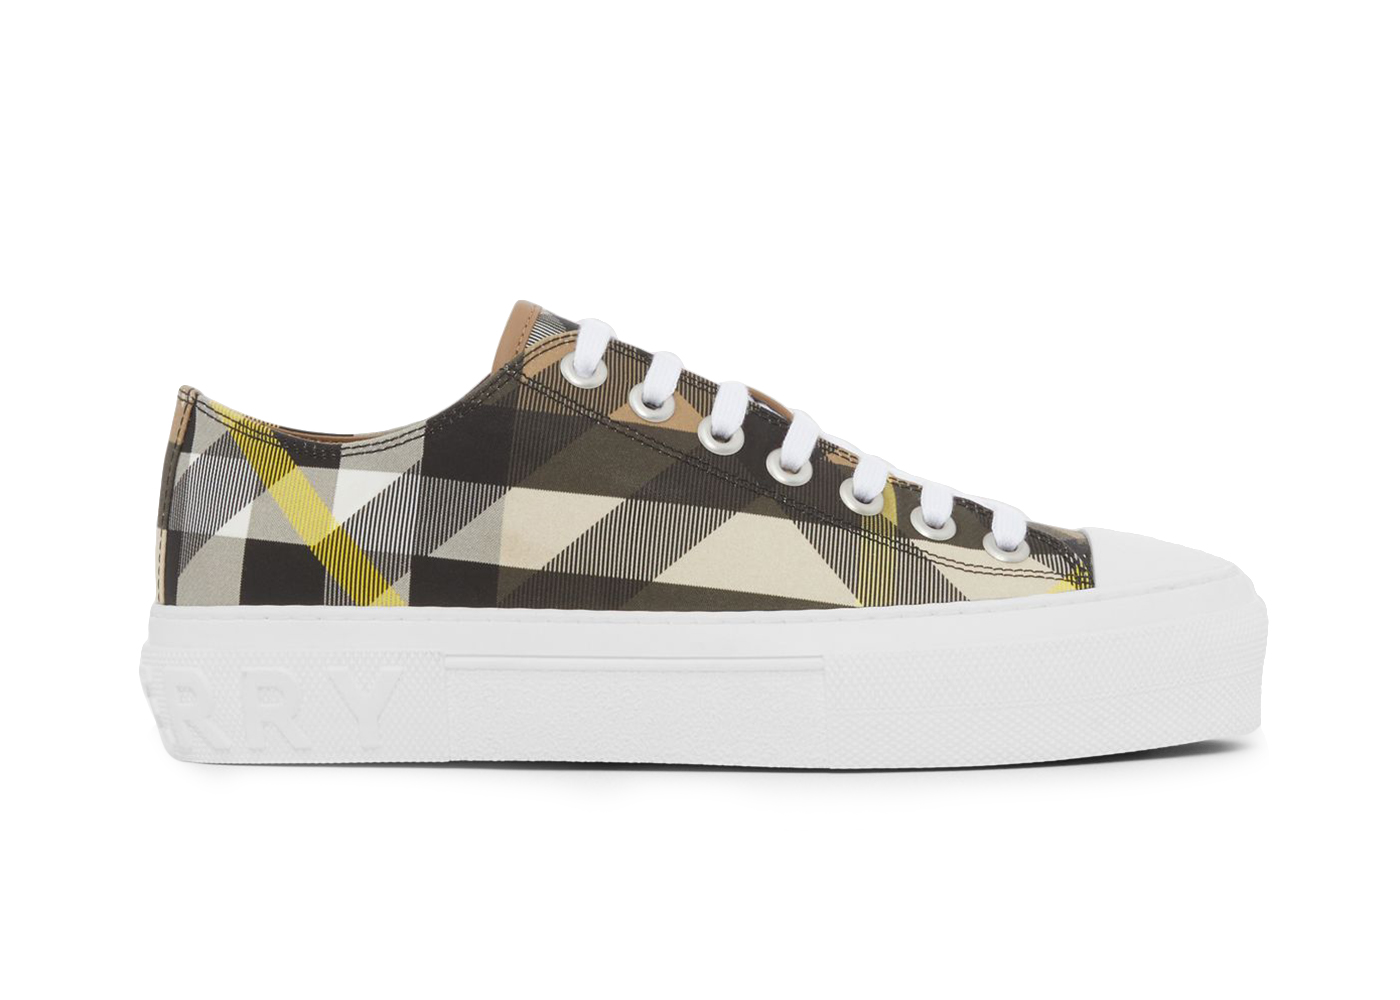 Burberry Exaggerated Check Cotton Sneakers Wheat (Women's)